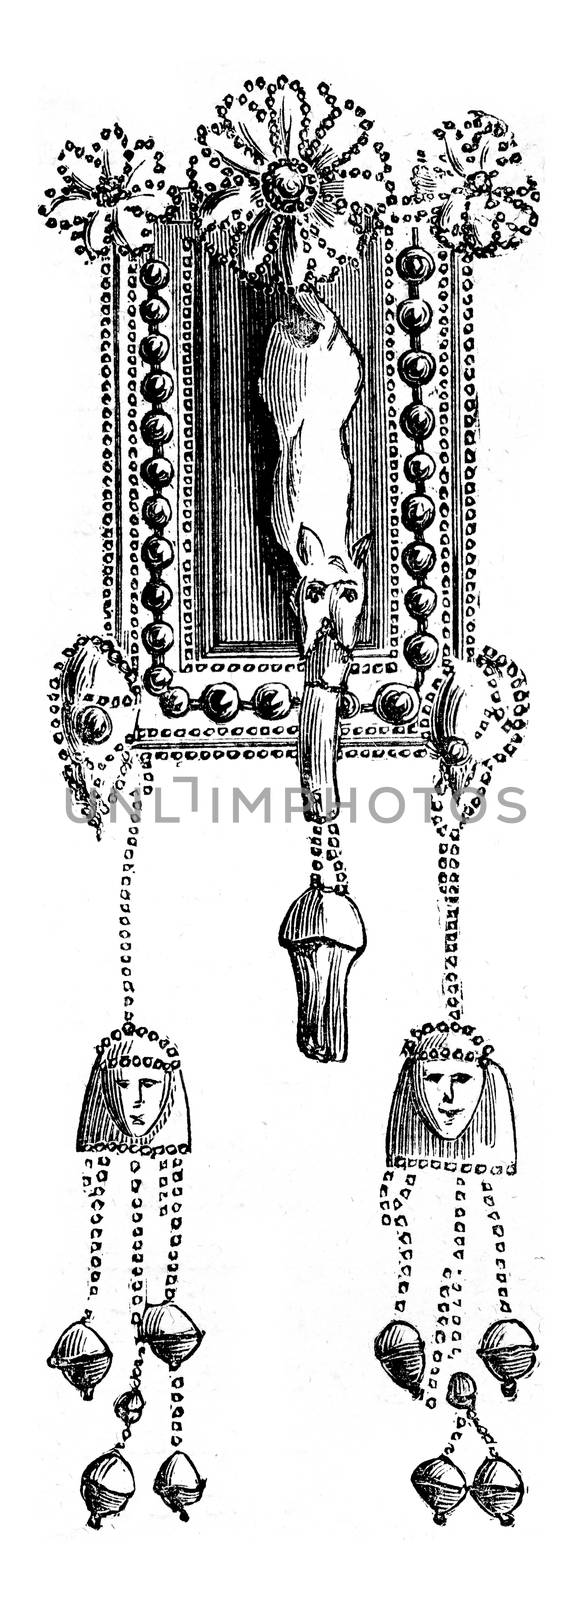 Ancient Phoenician earrings believed to be Egyptian in artistic origin, probably traded through Kameiros, Rhodes in Greece, preserved at the Louvre Museum. From Fine Arts Book, vintage engraving, 1880.
